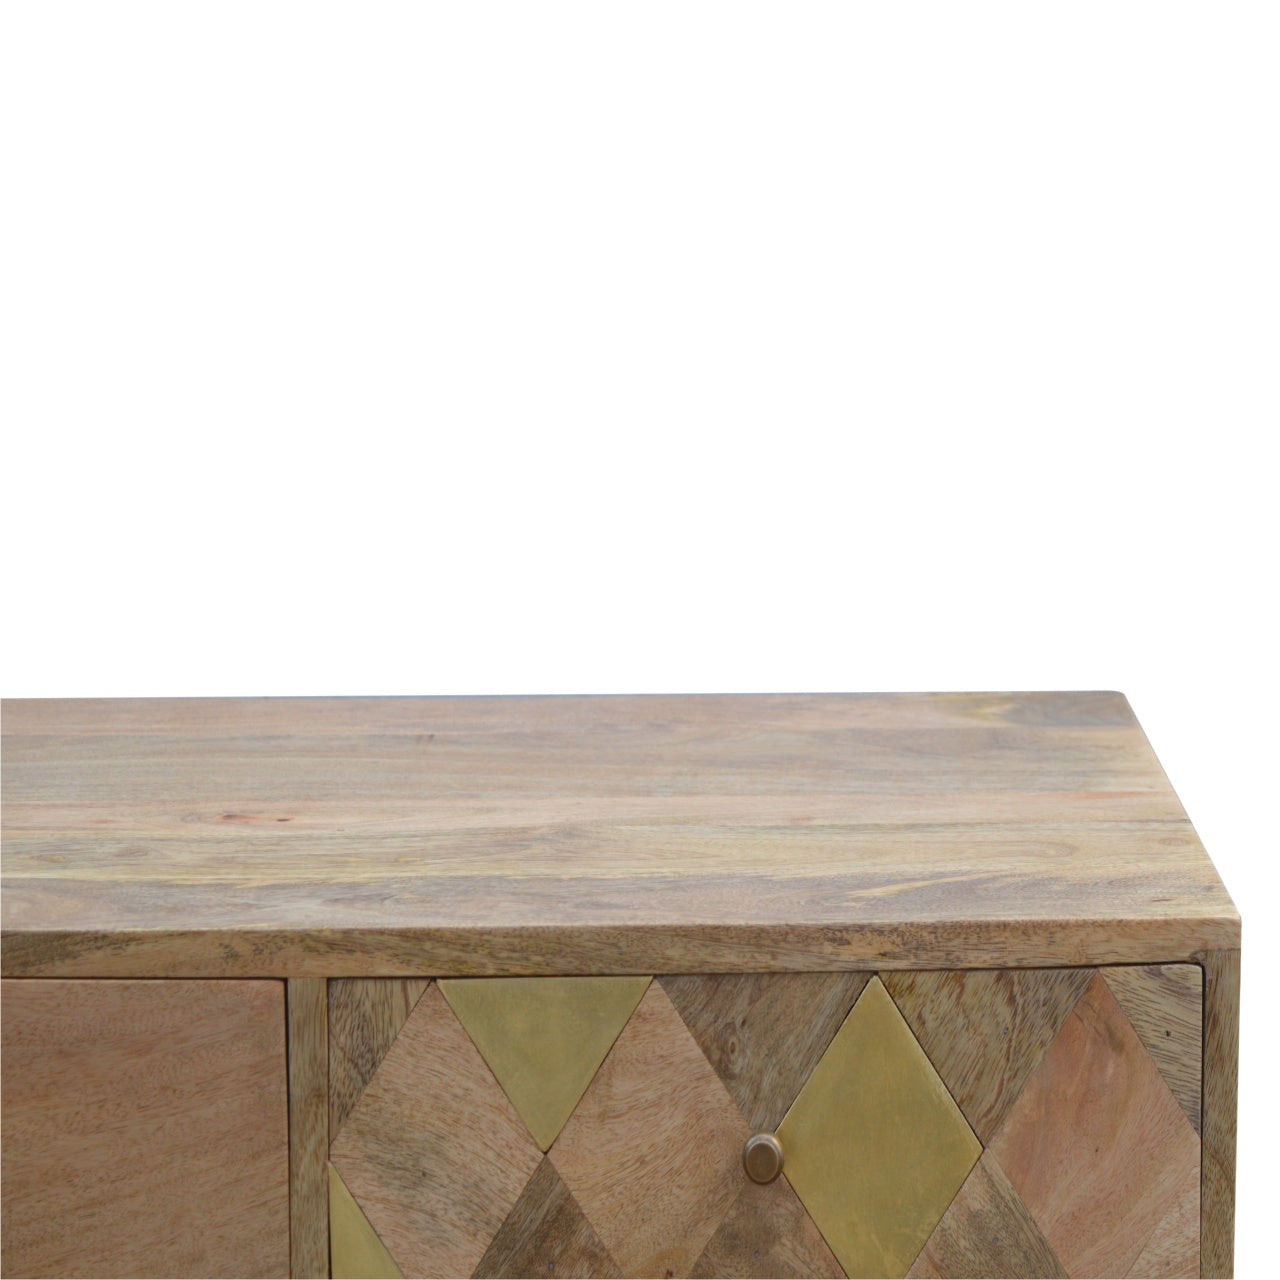 Colette Coffee Table, Oak & Brass Inlay - Broxle